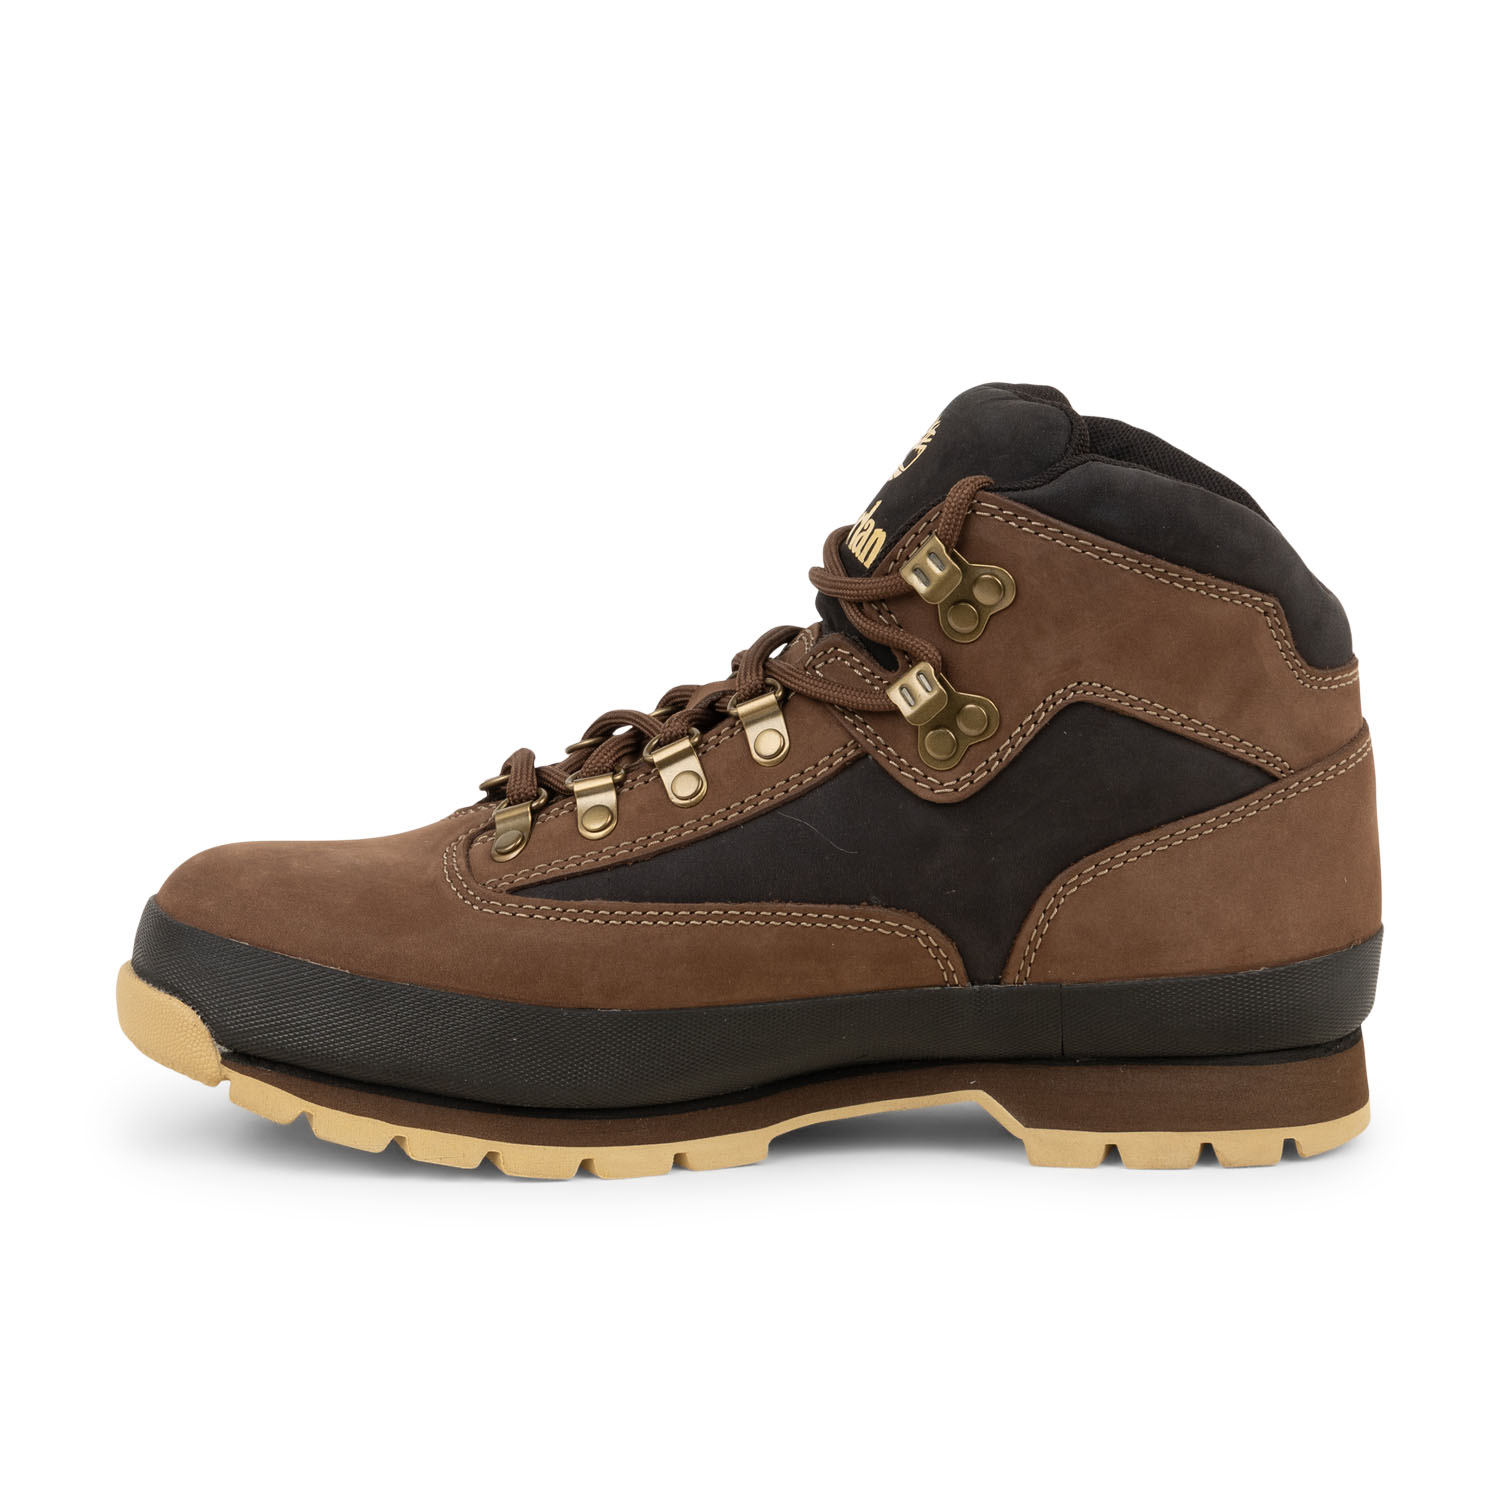 04 - EURO HIKER - TIMBERLAND - Chaussures à lacets - Nubuck